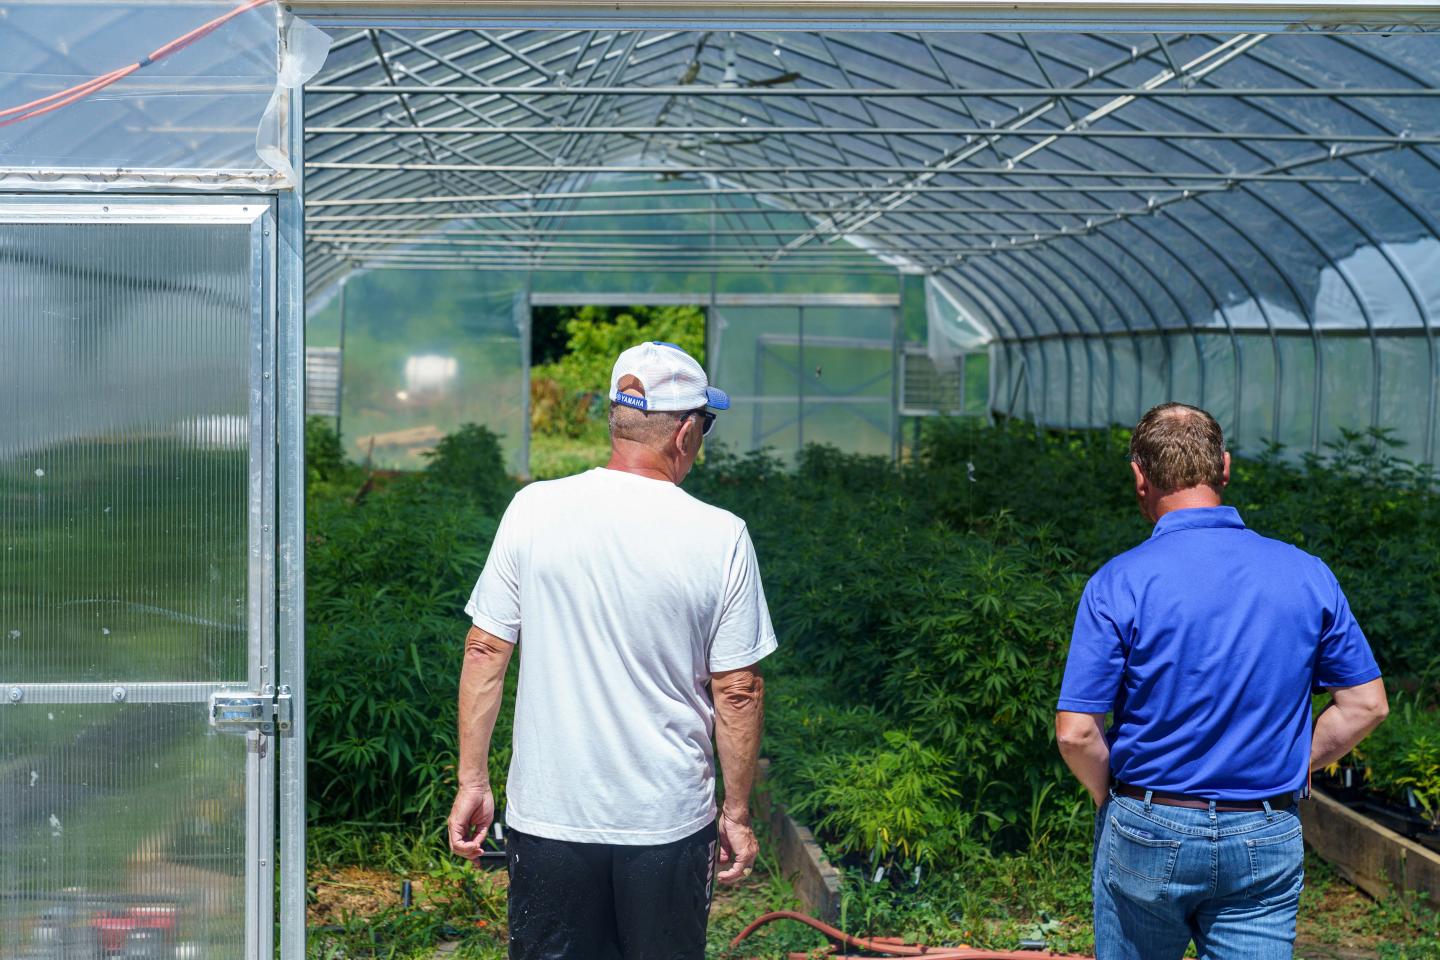 Jeff Garland (left) gives Indiana NRCS district conservationist Lee Schnell a tour of Papa G’s Organic Hemp Farm in Crawford County, IN June 23, 2022.